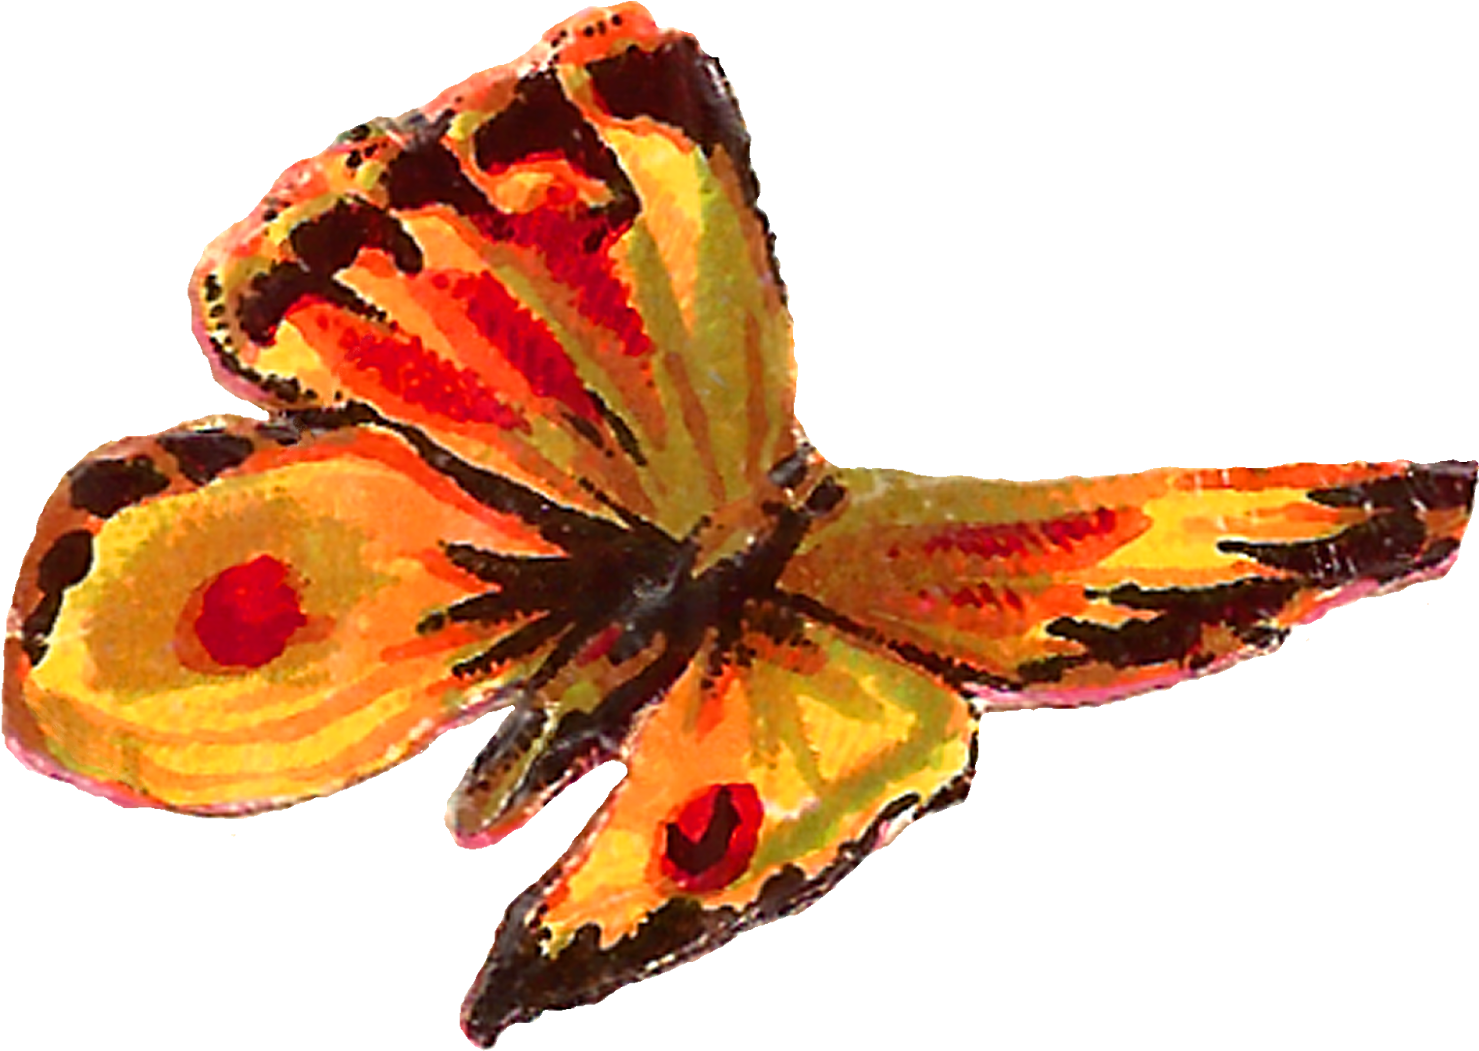 The Second Digital Butterfly Clip Art Is Of The Common - Stock.xchng (1600x1190)